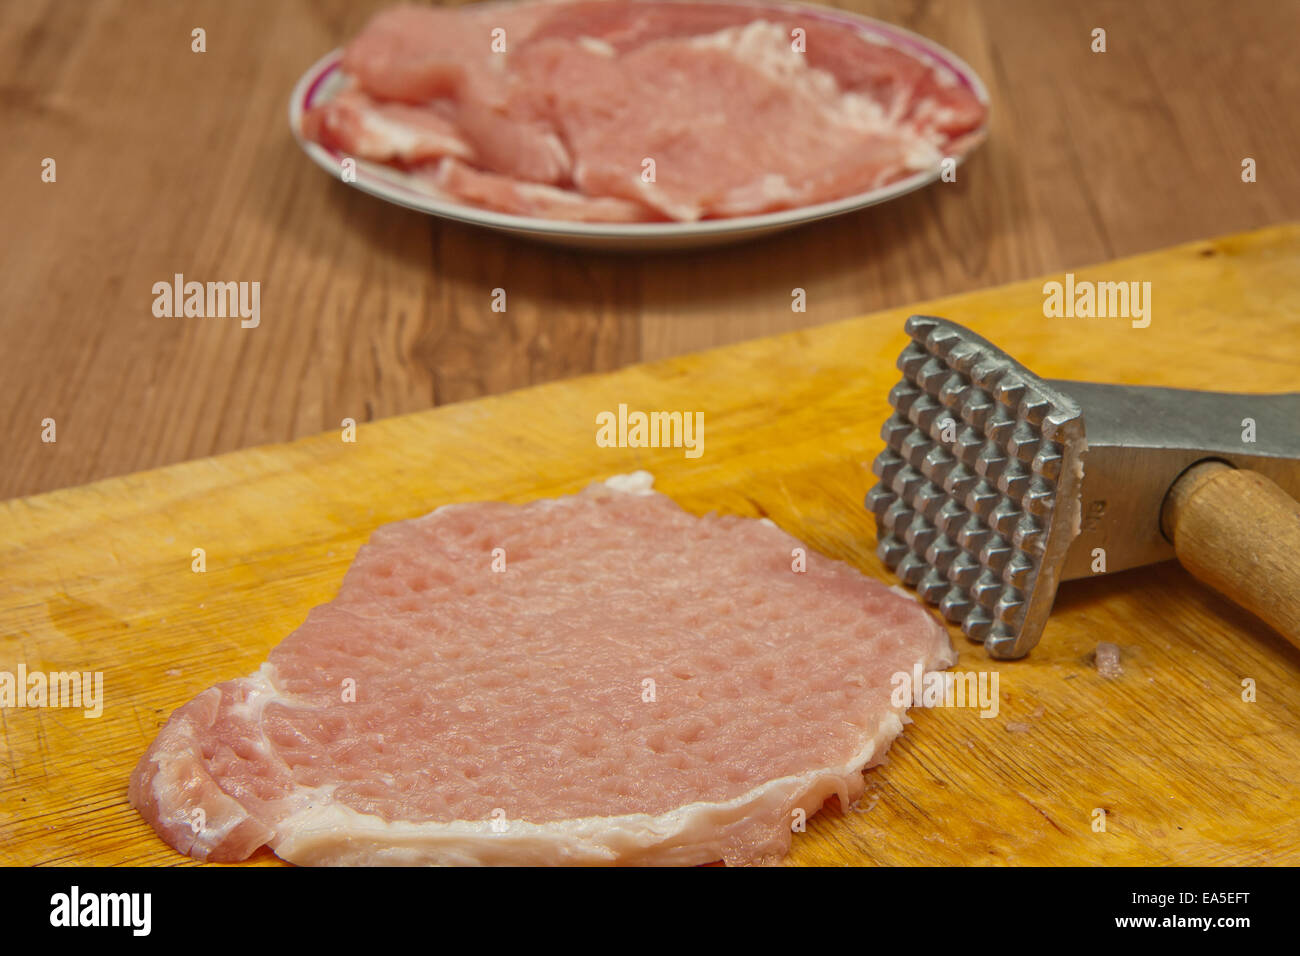 Pork chops ready to be fried. Stock Photo